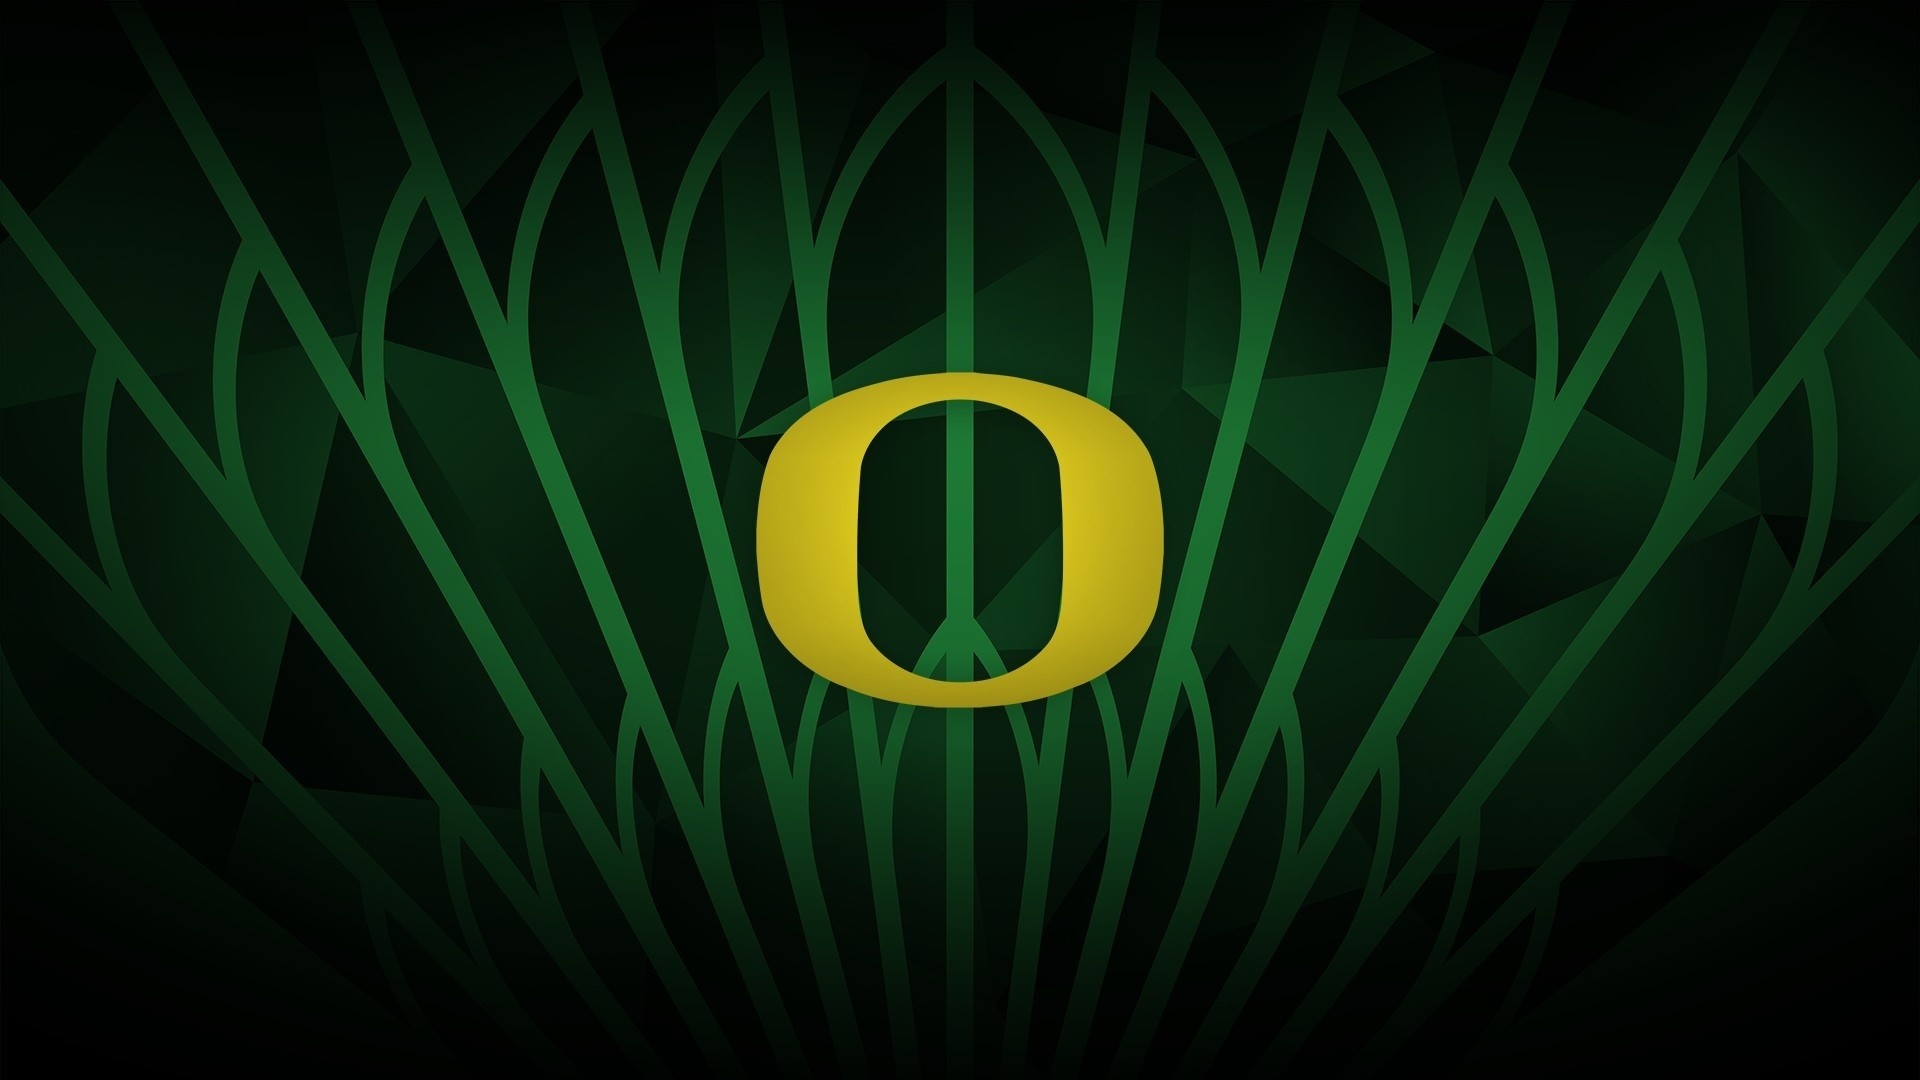 Cool Oregon Ducks Pictures Wallpapers